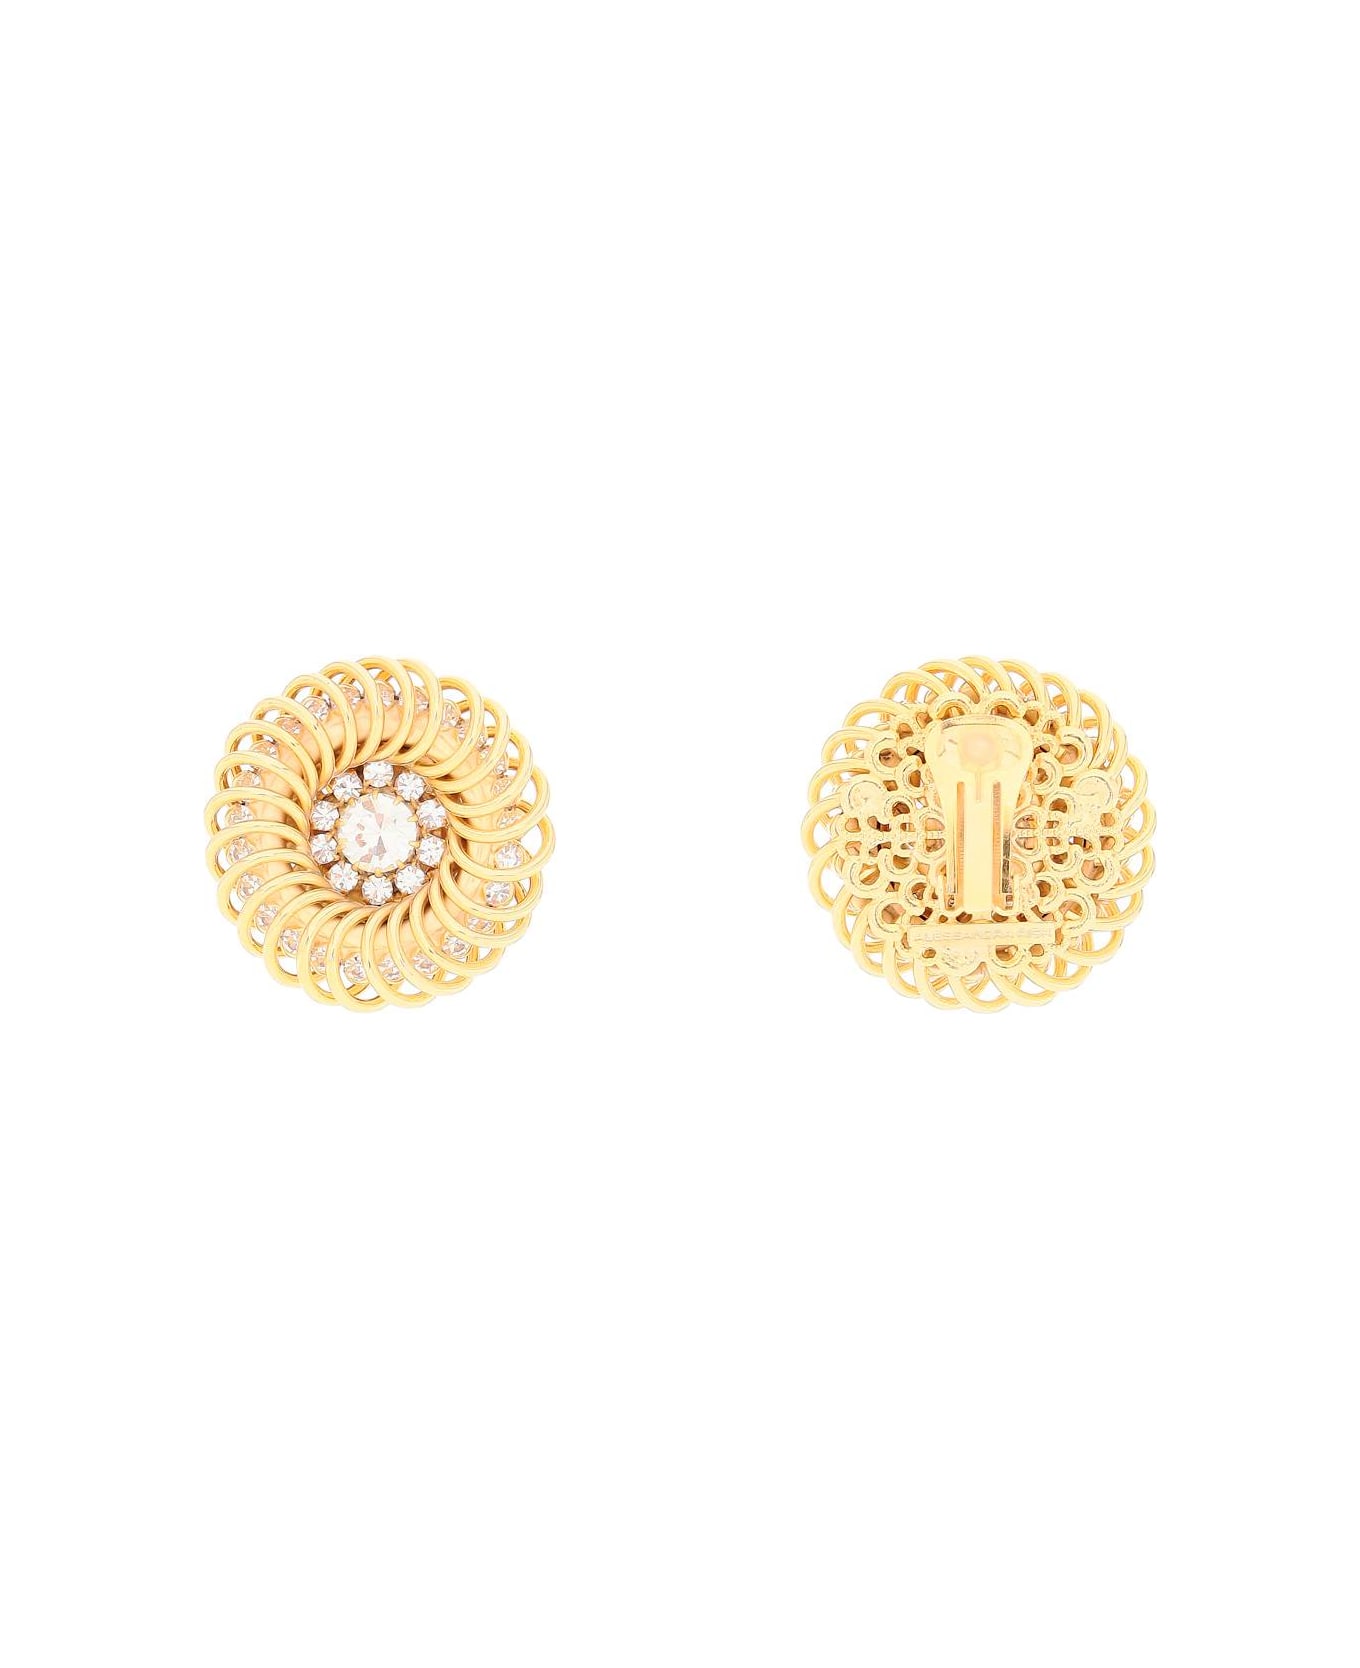 Alessandra Rich Spiral Earrings - CRY GOLD (Gold) イヤリング